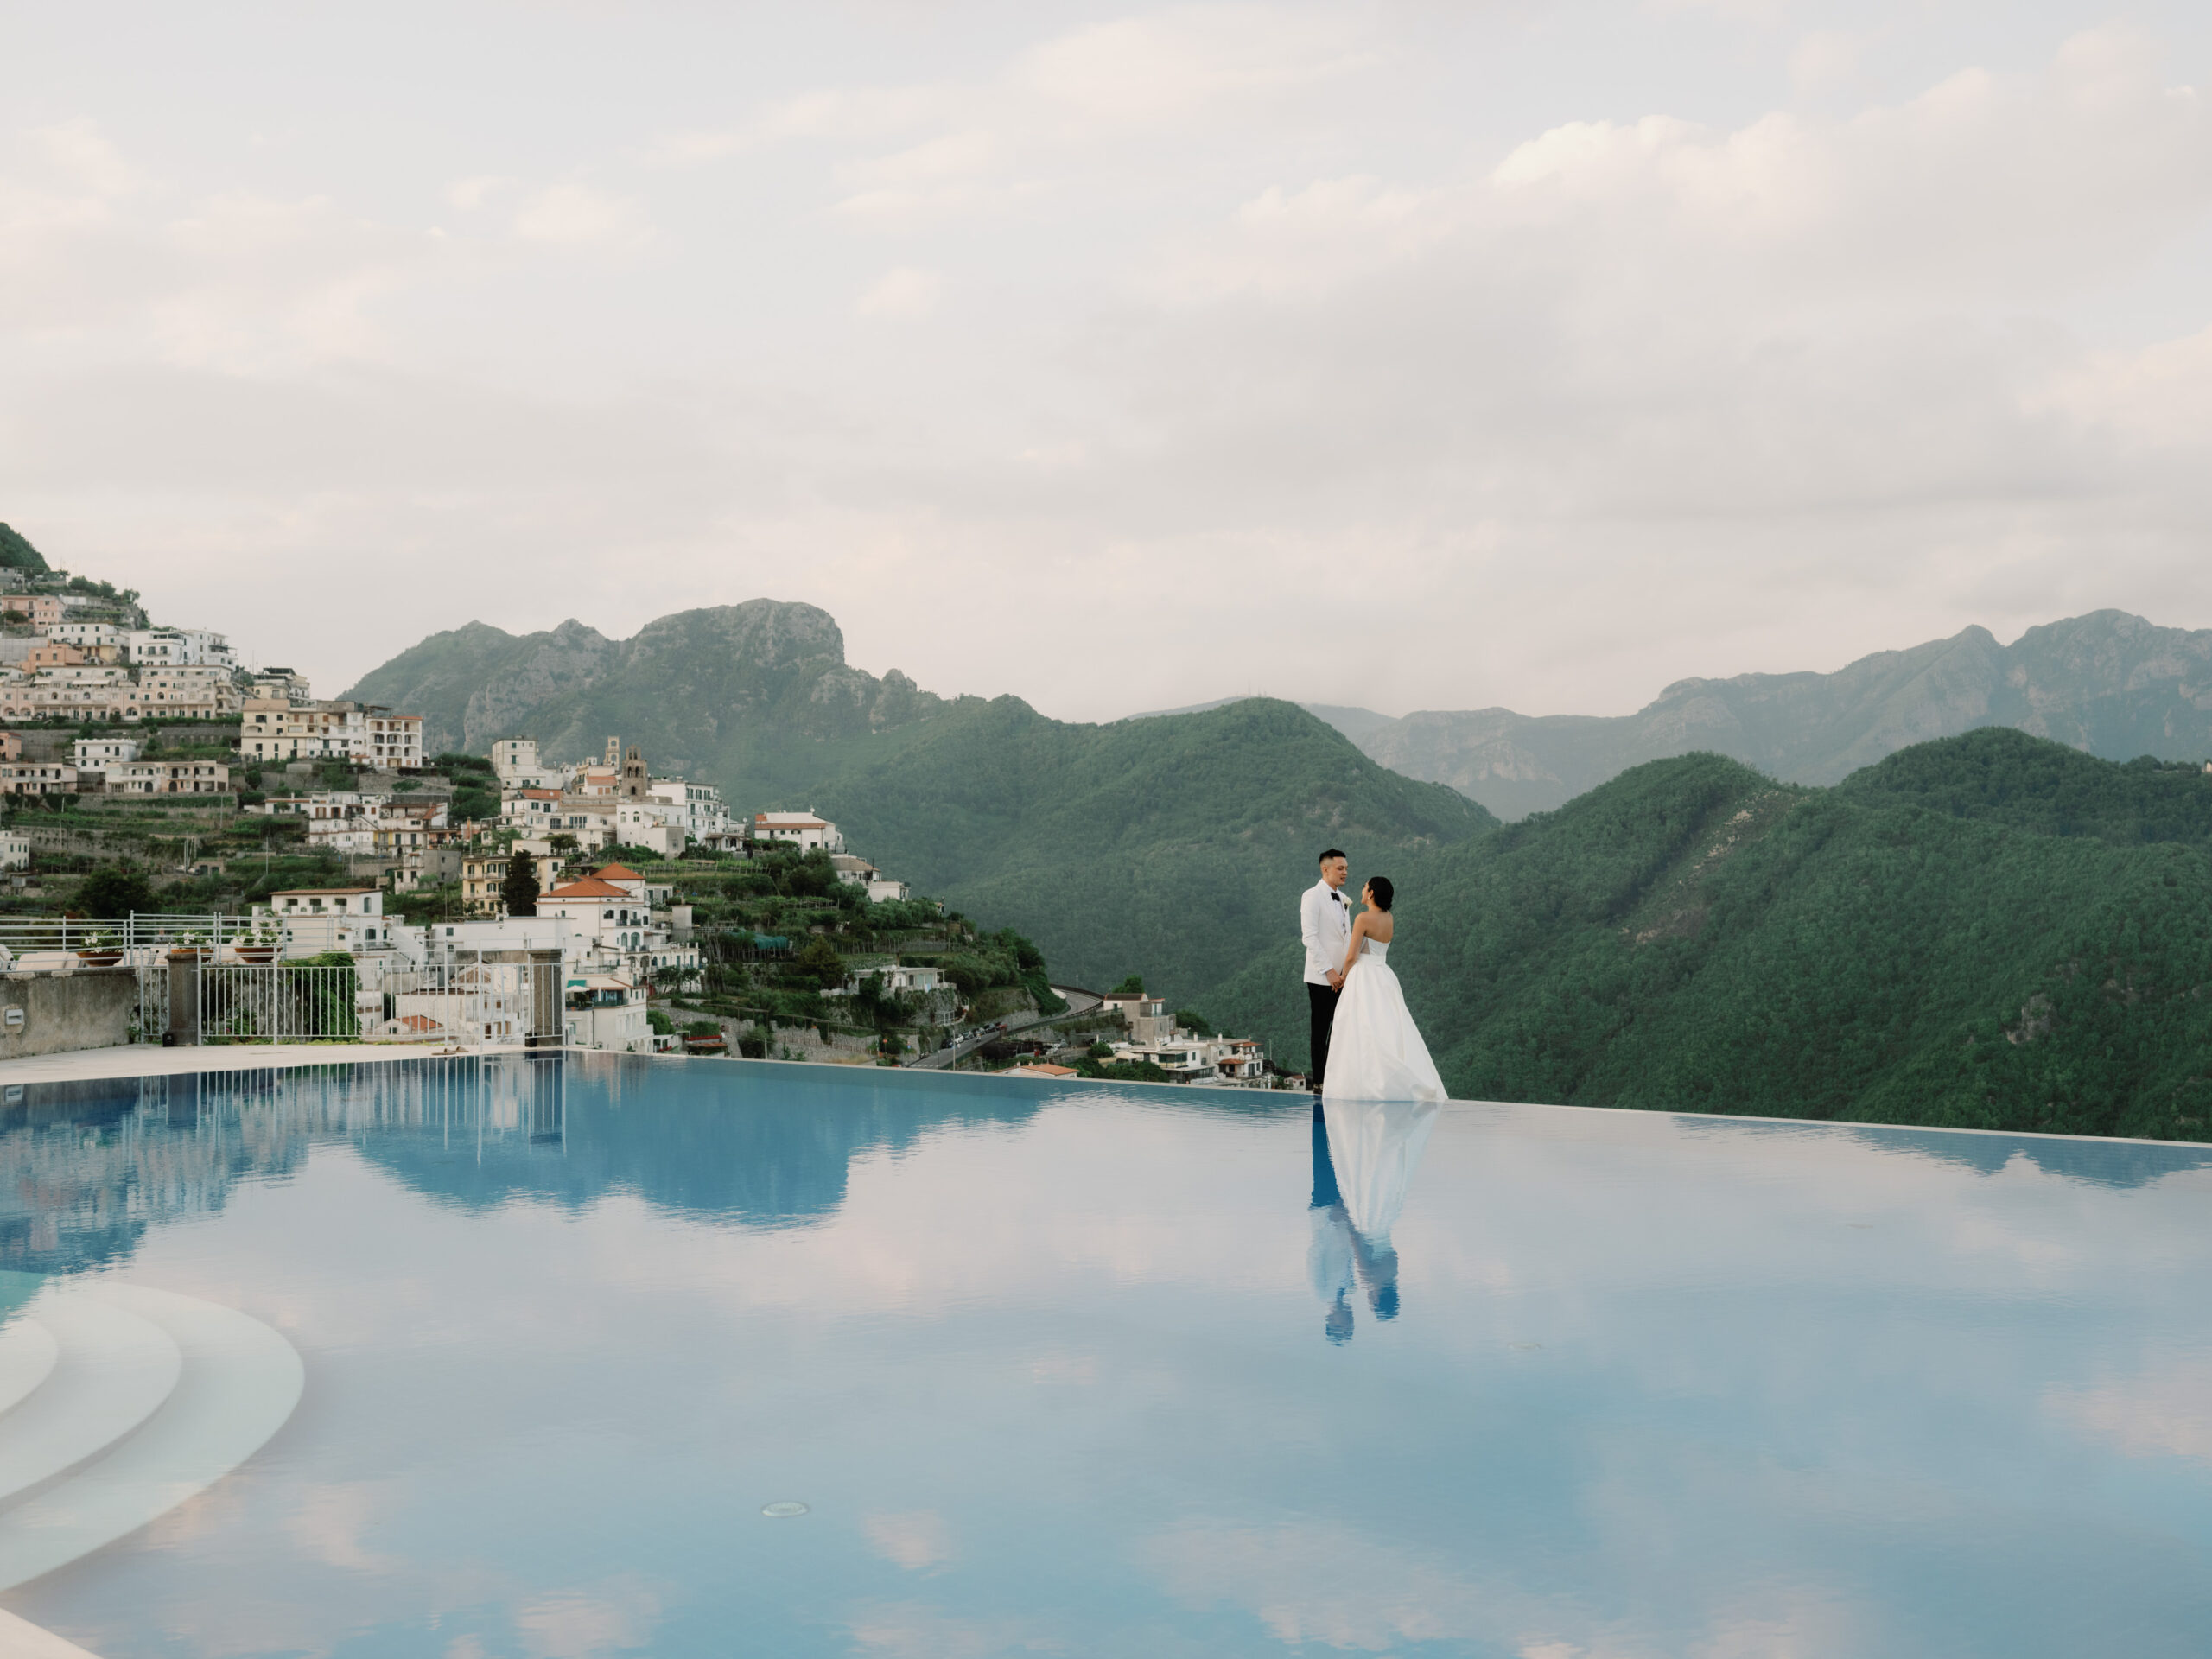 The newlyweds are standing in the infinity pool at Hotel Caruso Belmond, Italy. Image by Jenny Fu Studio